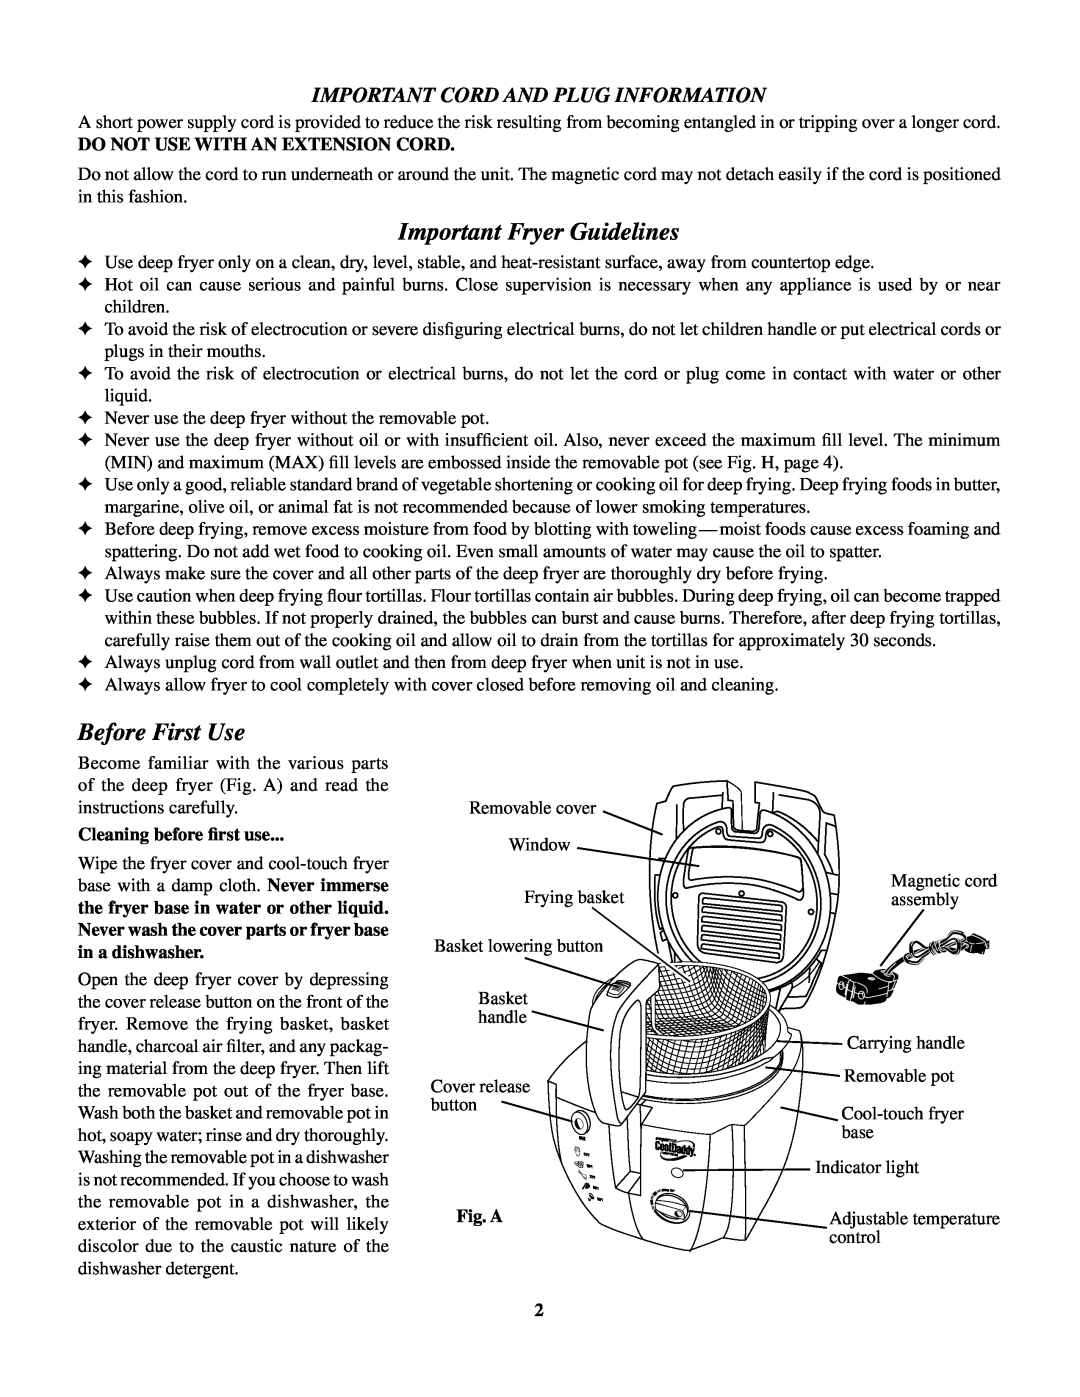 Presto CoolDaddy manual Important Fryer Guidelines, Before First Use, Do Not Use With An Extension Cord, Fig. A 